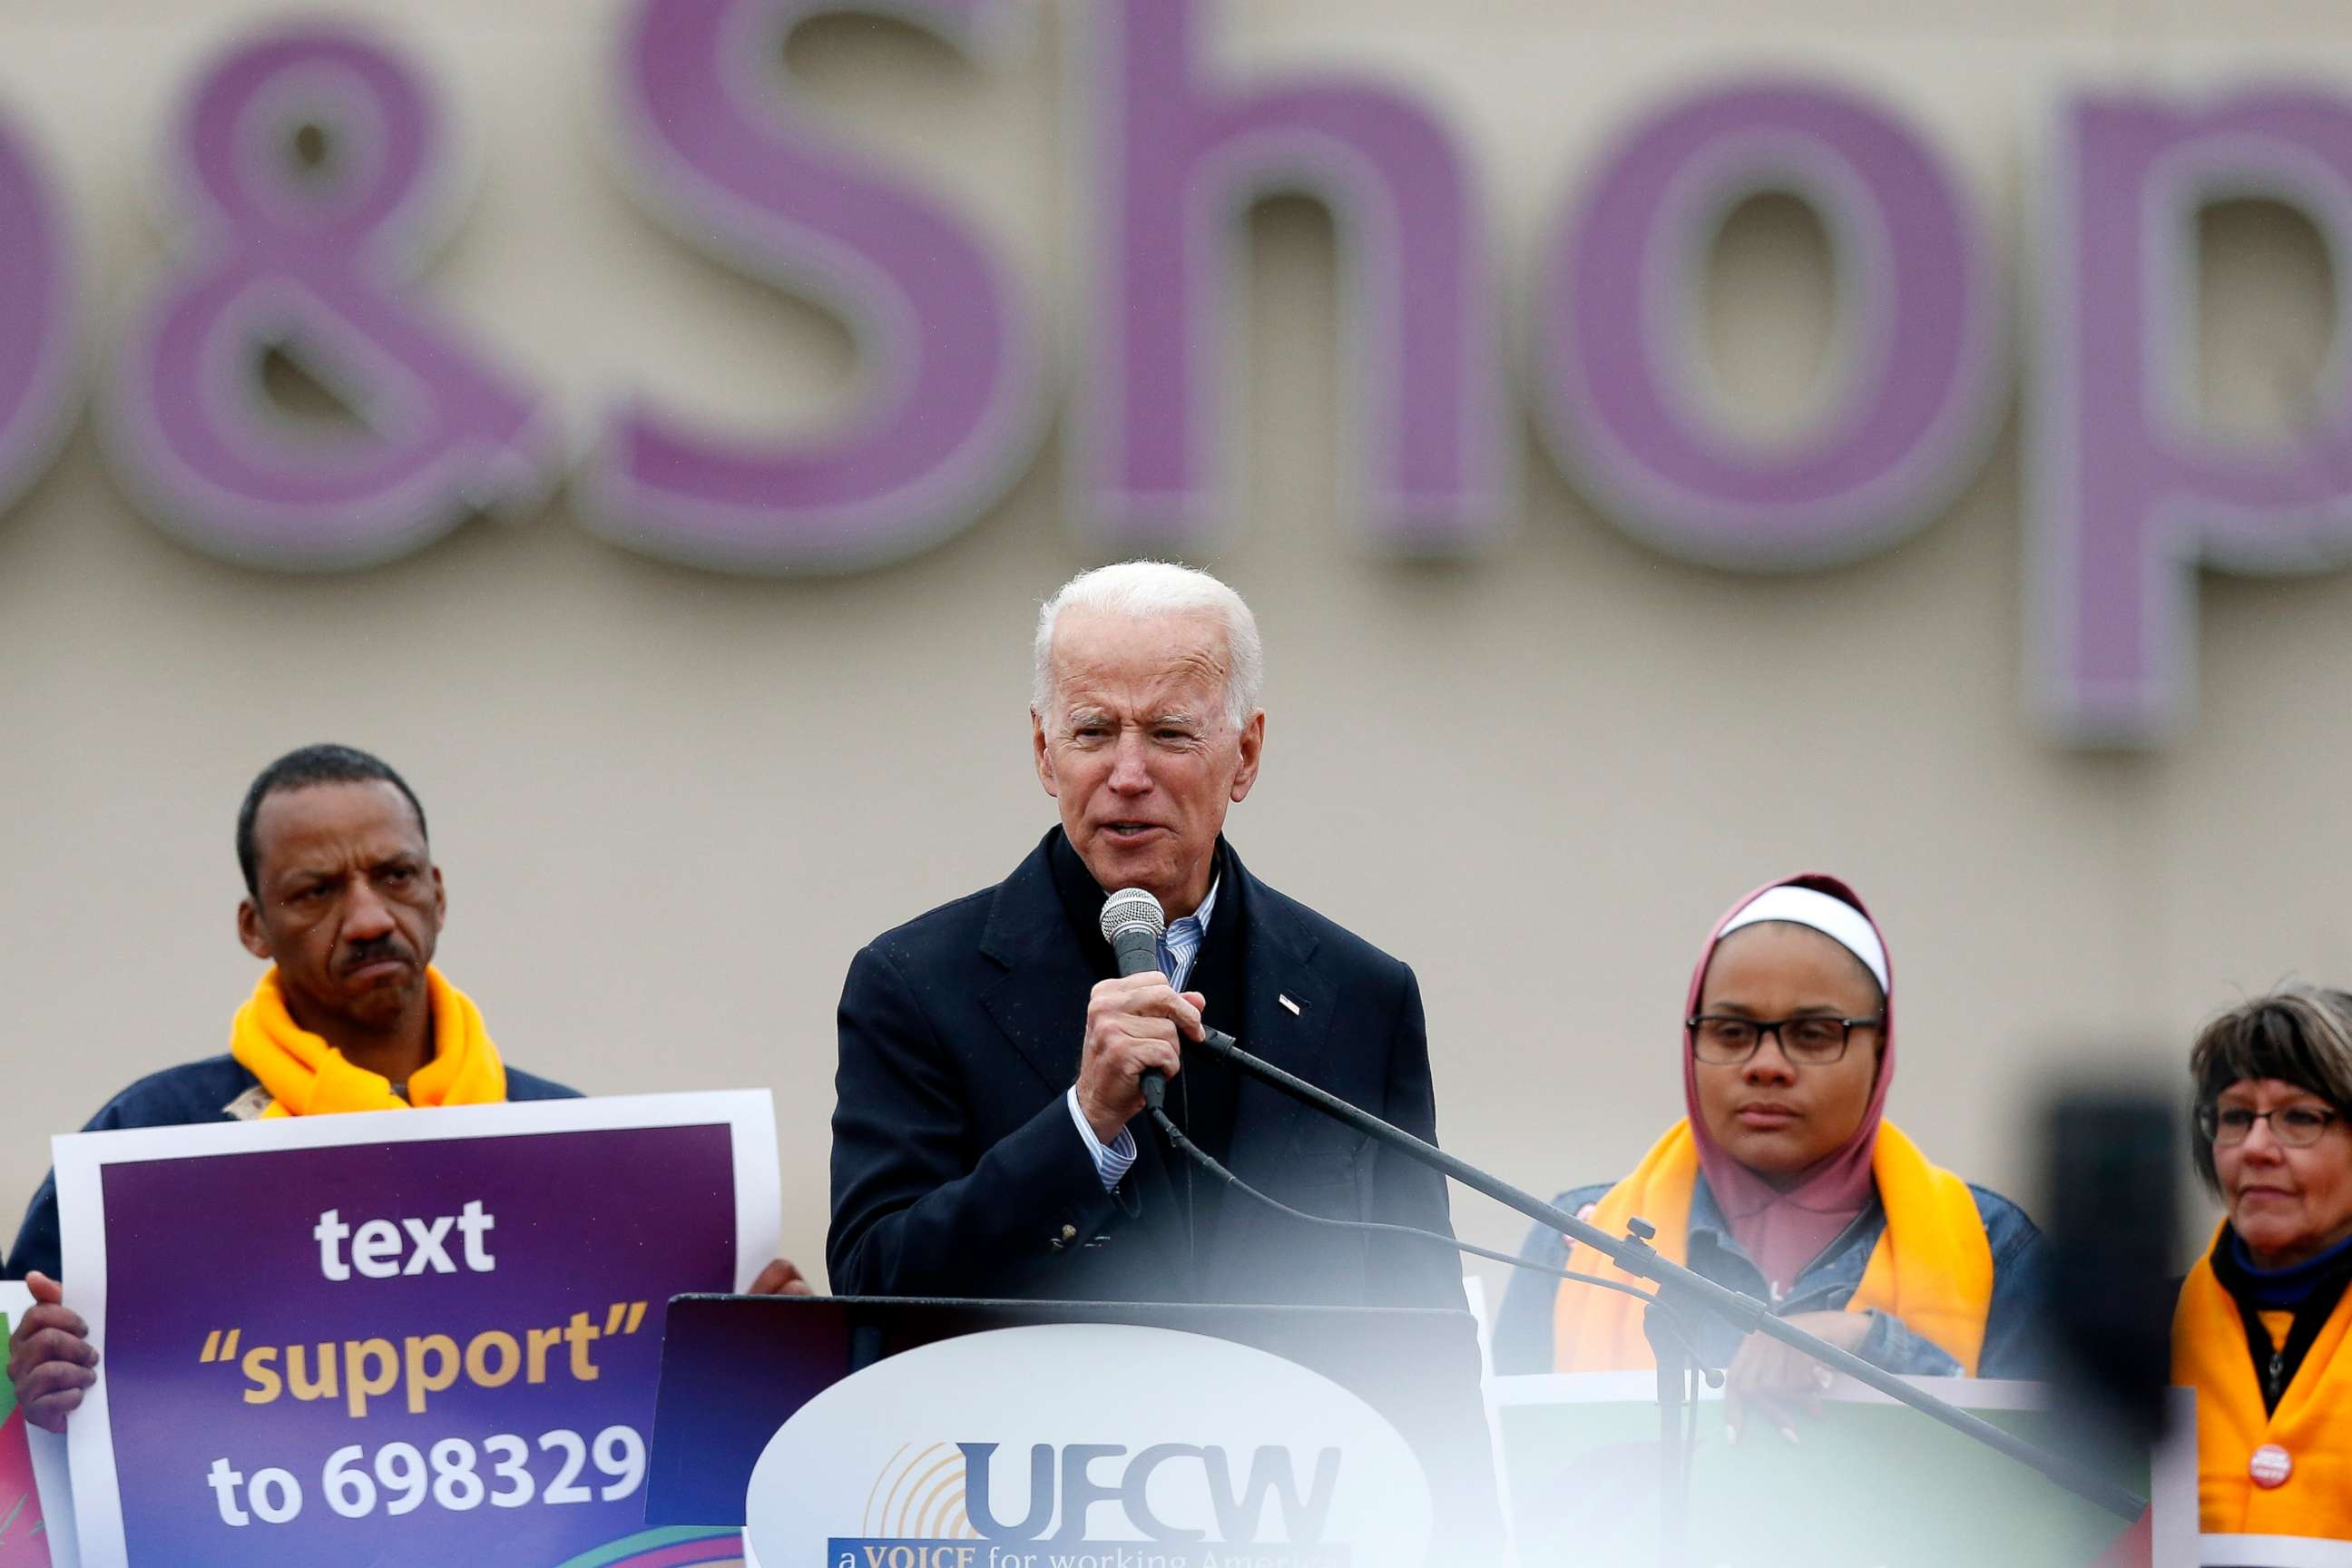 PHOTO: Former Vice President Joe Biden speaks at a rally in support of striking Stop & Shop workers in Dorchester, Mass., April 18, 2019.